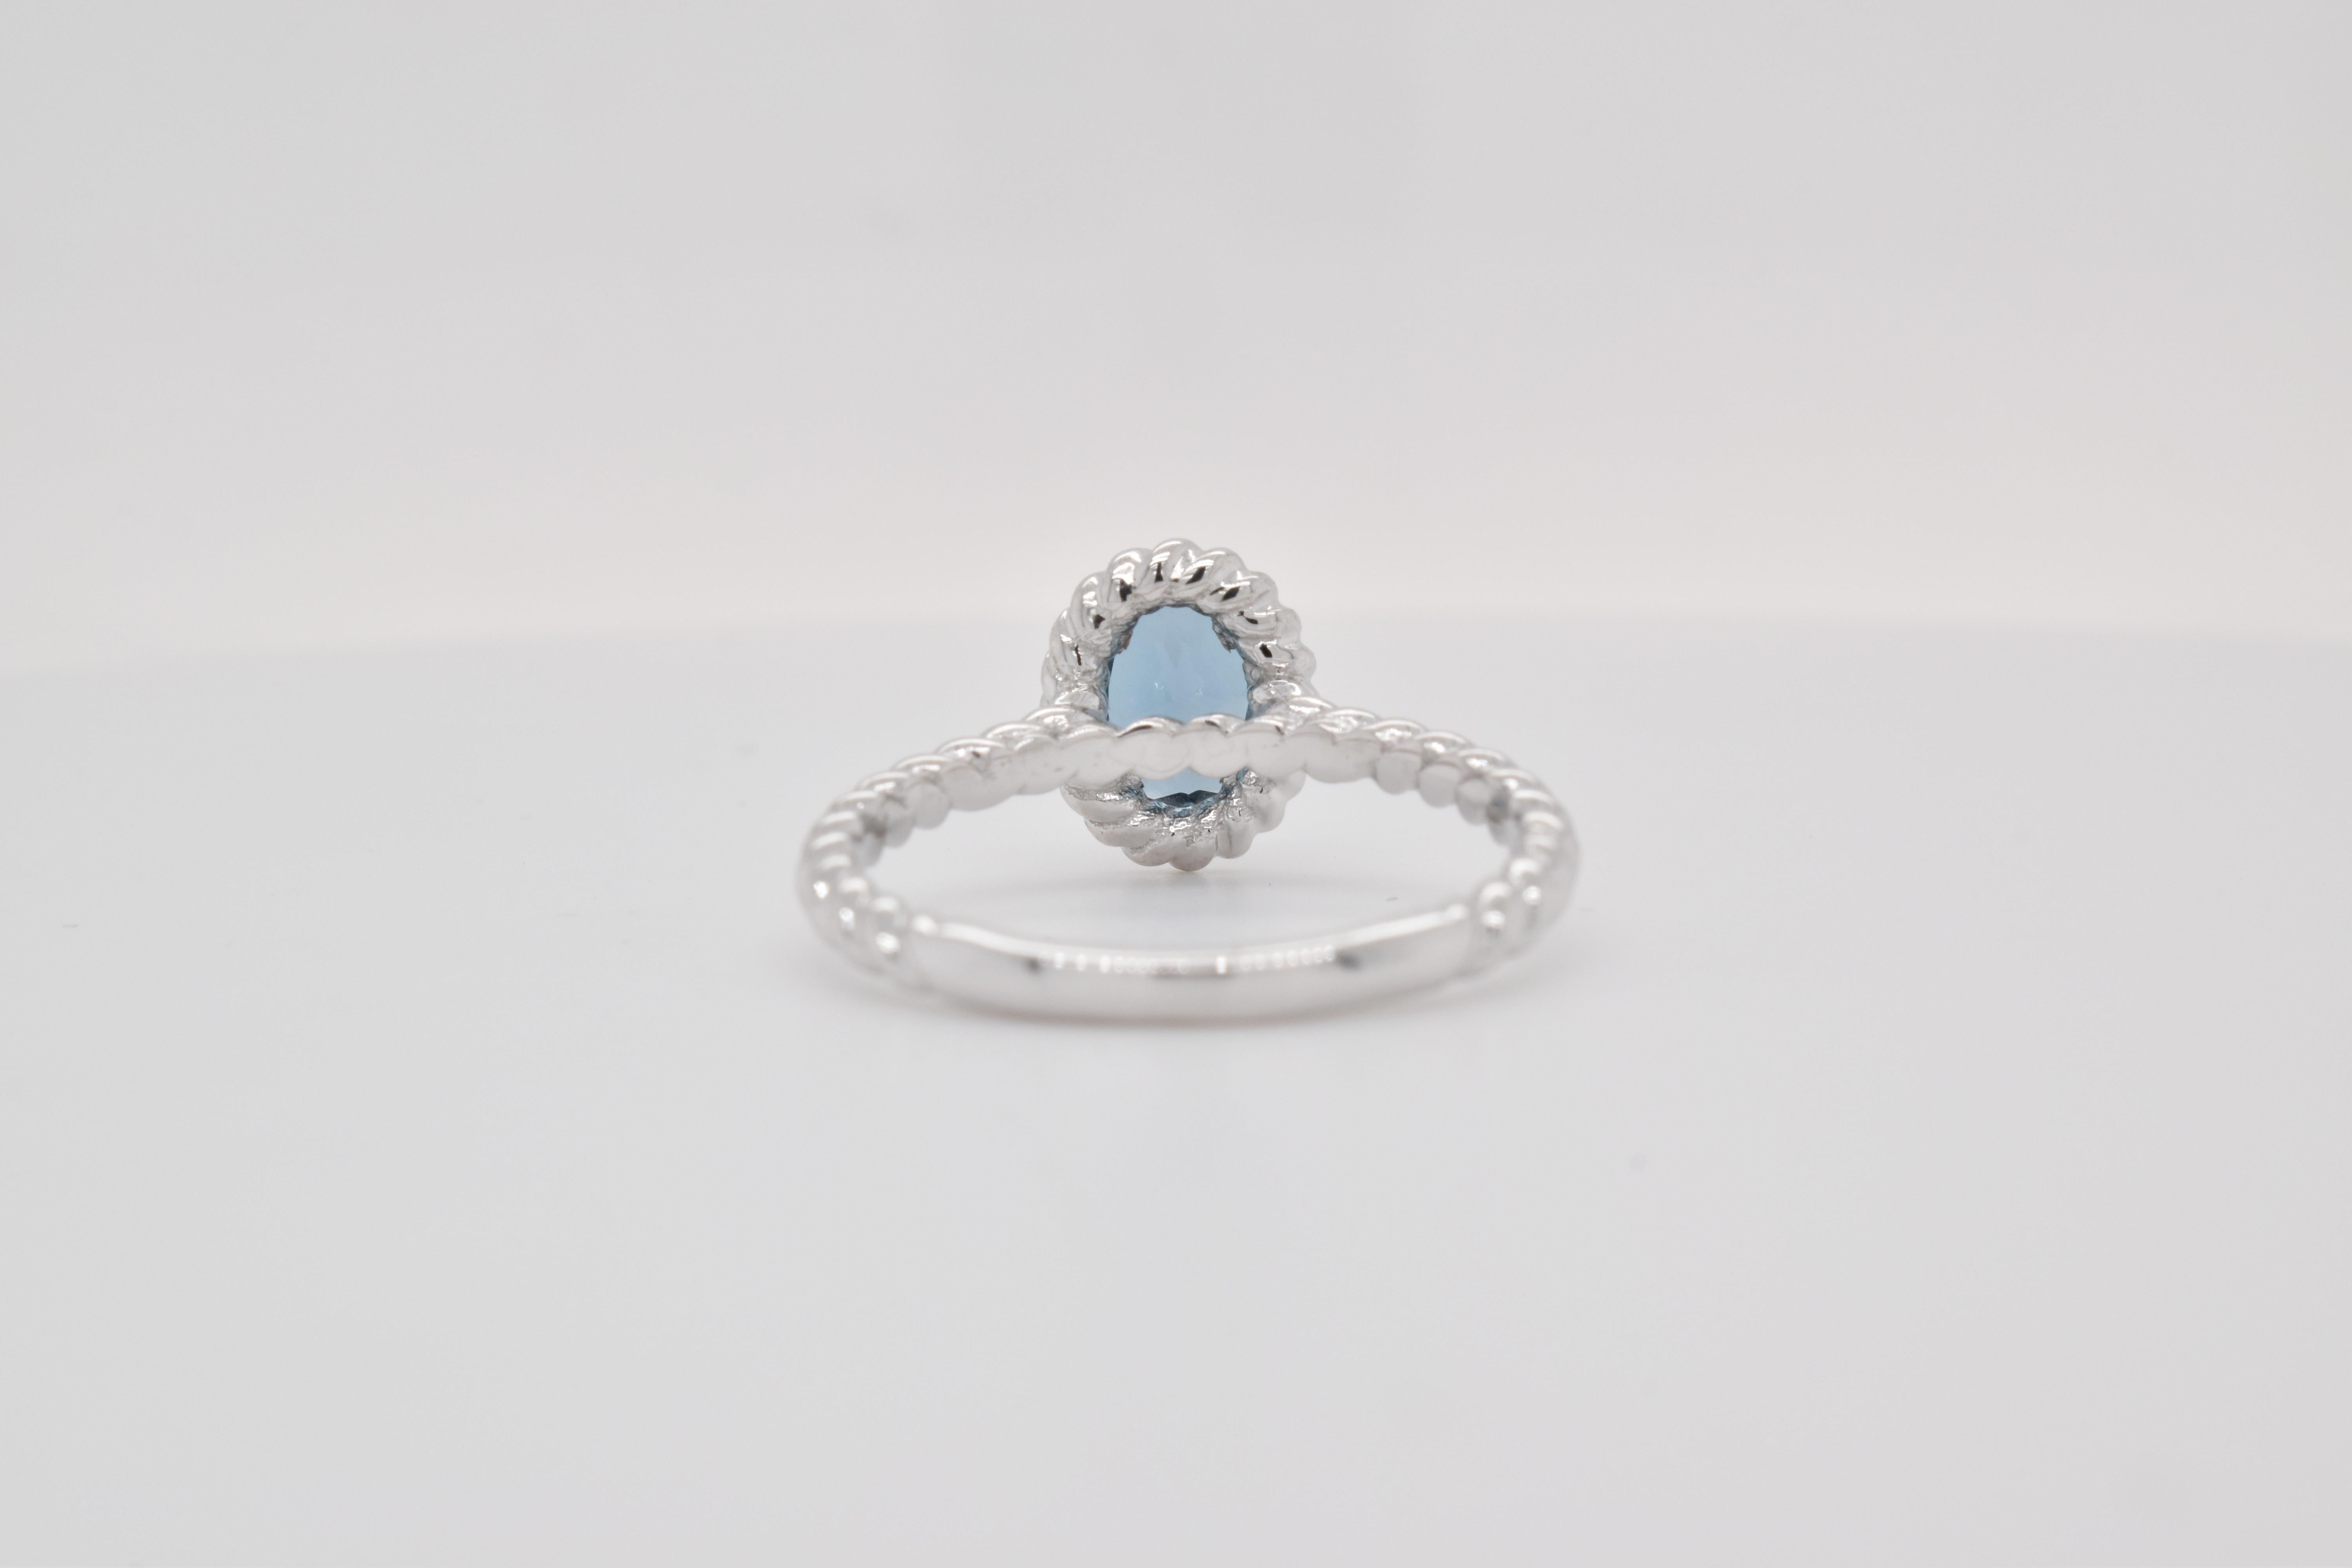 Oval Shape London Blue Topaz Gemstone  beautifully crafted  in a Ring. A fiery Blue color December Birthstone. For a special occasion like Engagement or Proposal or may be as a gift for a special person.

Primary Stone Size - 7x5 mm